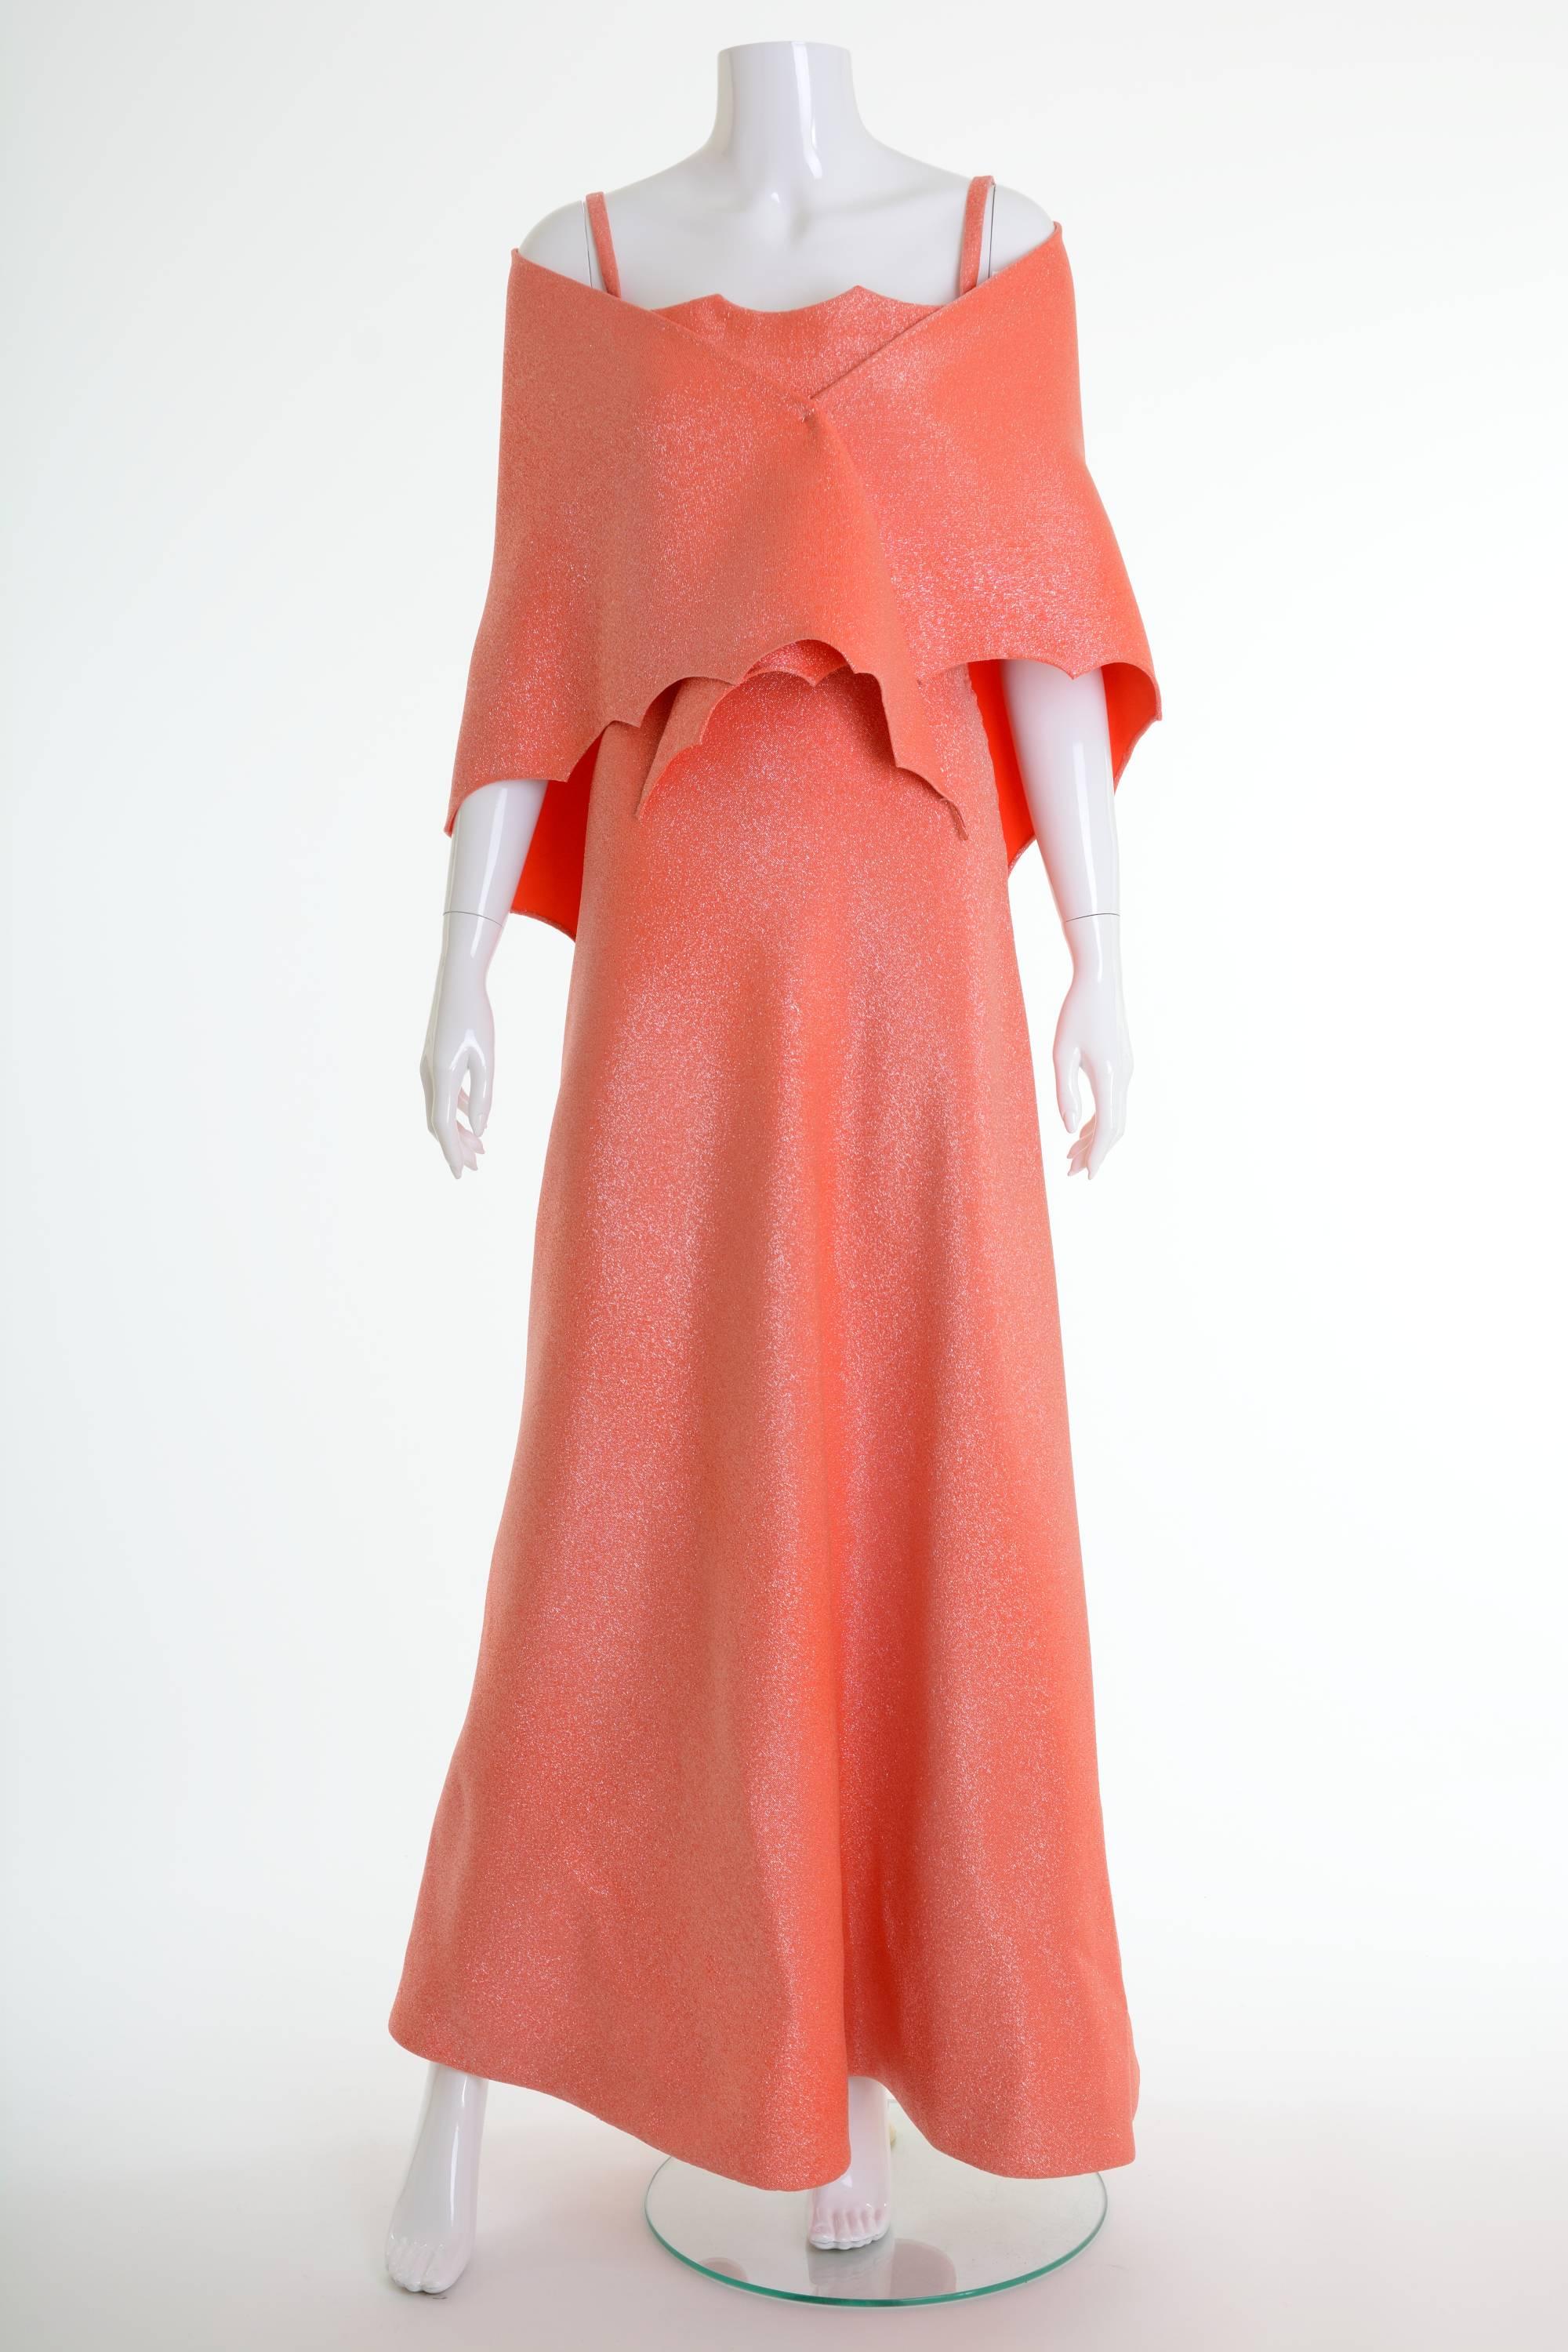 This gorgeous 1960s Curiel Italian Couture long dress is in orange lurex fabric. It has spaghetti straps, boning bodice and side zip closure. It's fully lined. It's included a lovely stole.

In 1945, Gigliola Curiel, the niece of Ortensia Curiel,